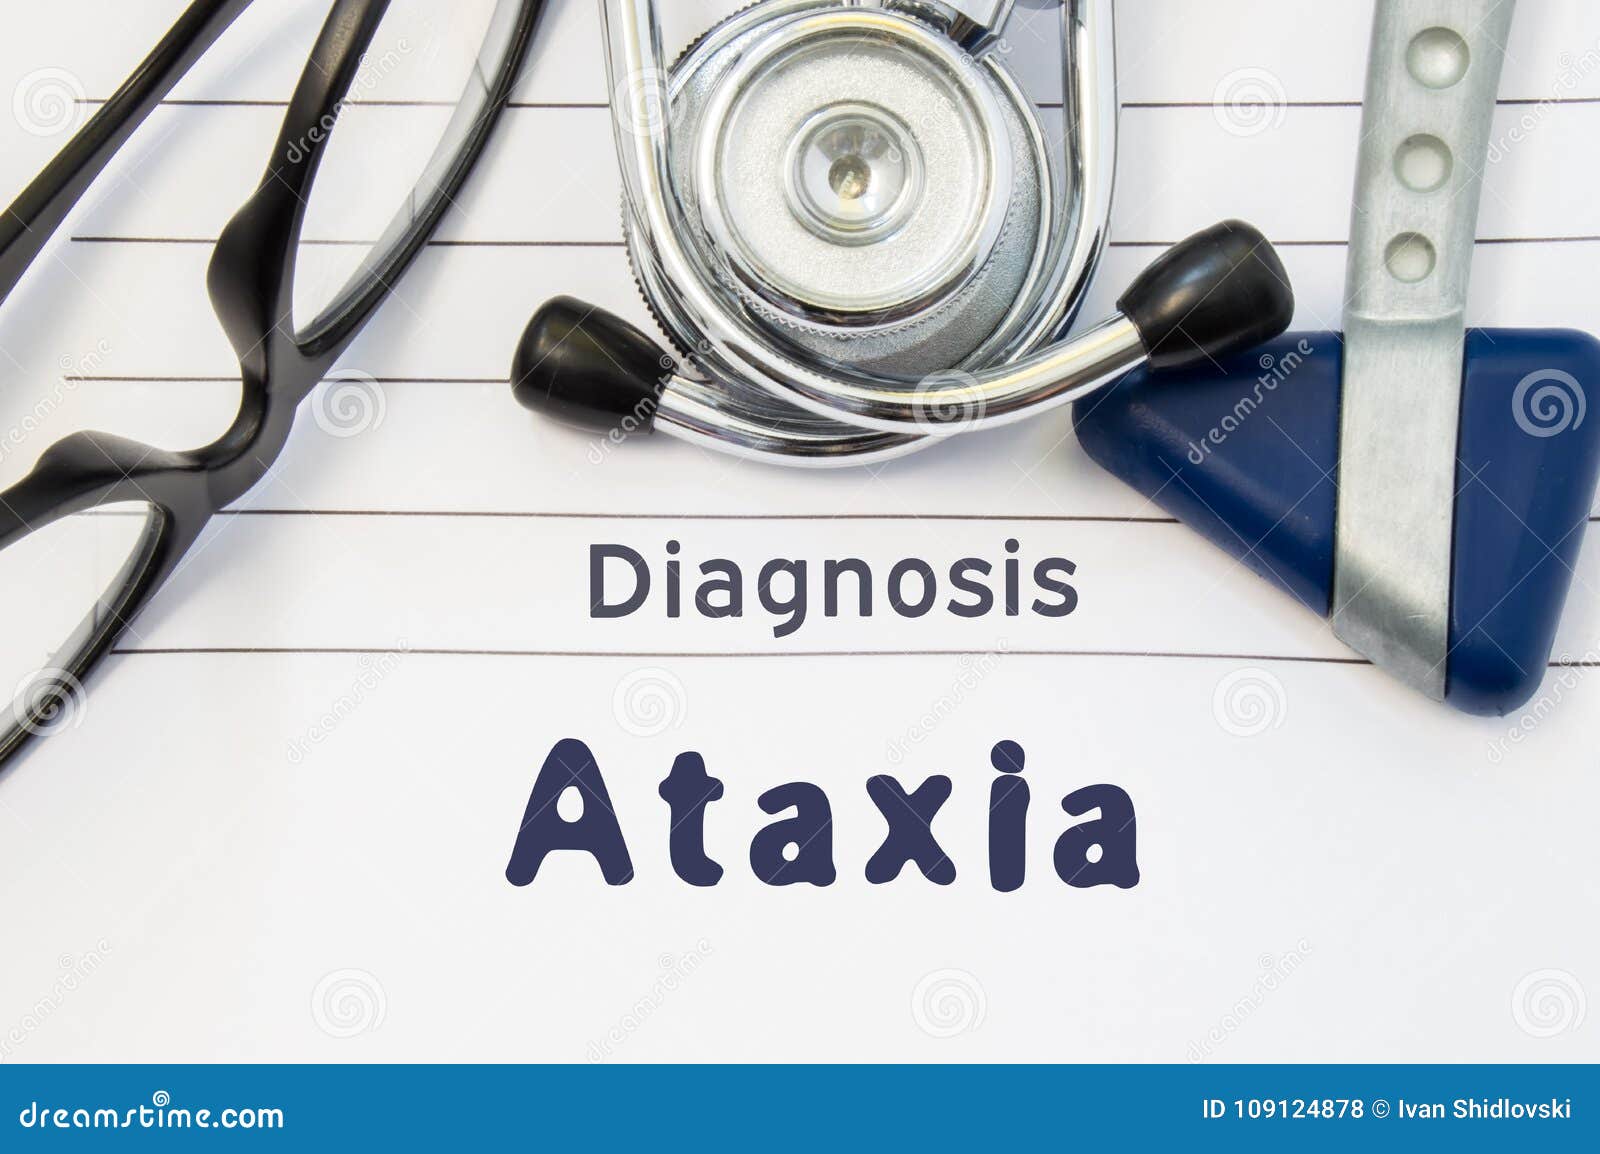 neurological diagnosis of ataxia. neurological hammer, stethoscope and doctor`s glasses lie on doctor workplace on sheet of notebo